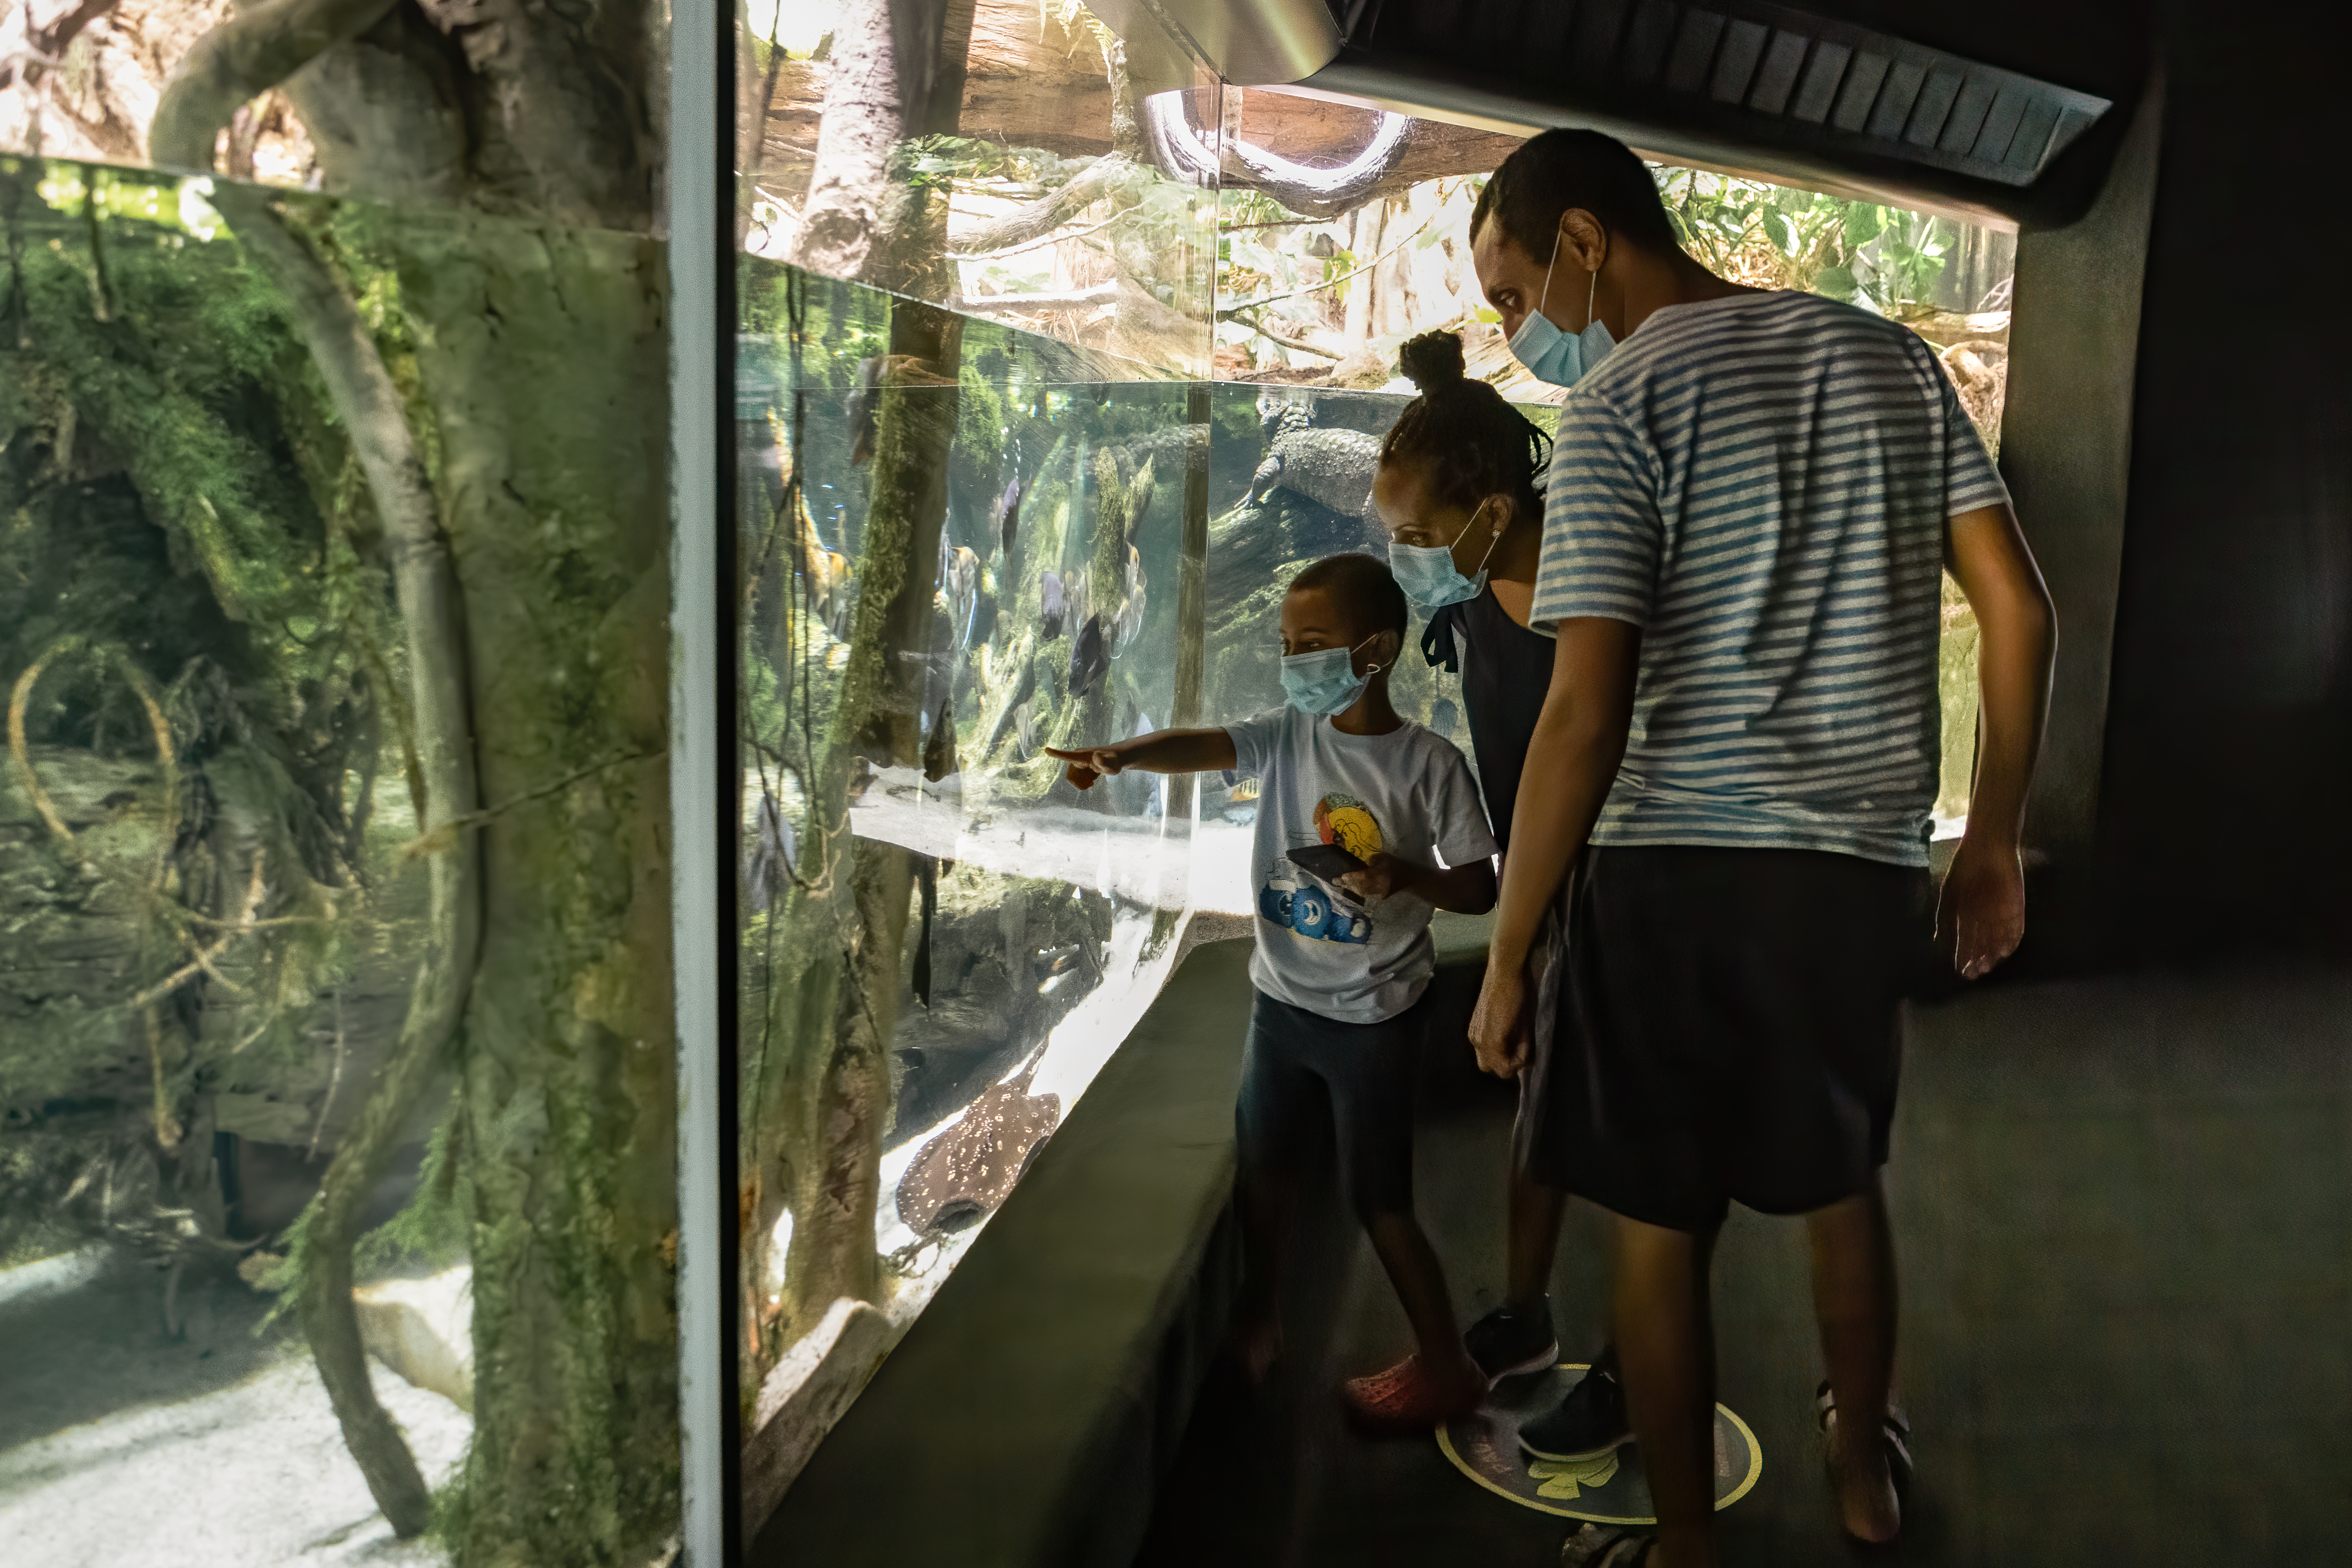 A masked family looks at an aquarium tank, with the child pointing directly at a fish.